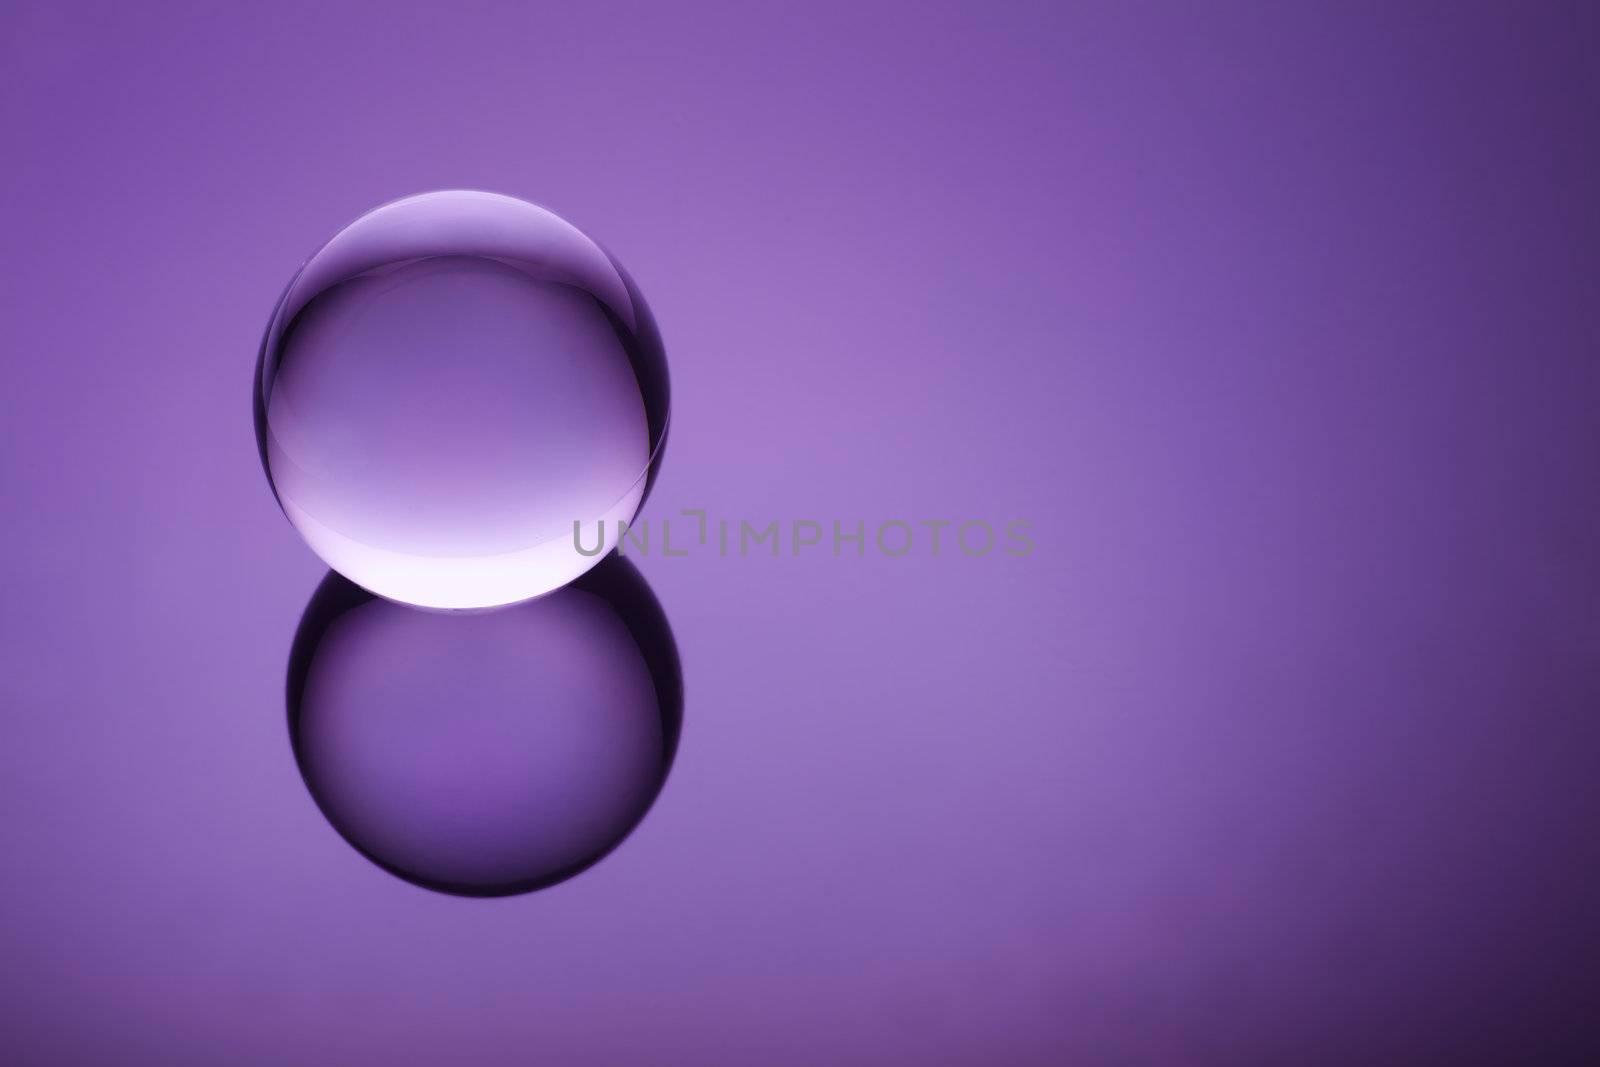 Clear ball floating on a purple gradient